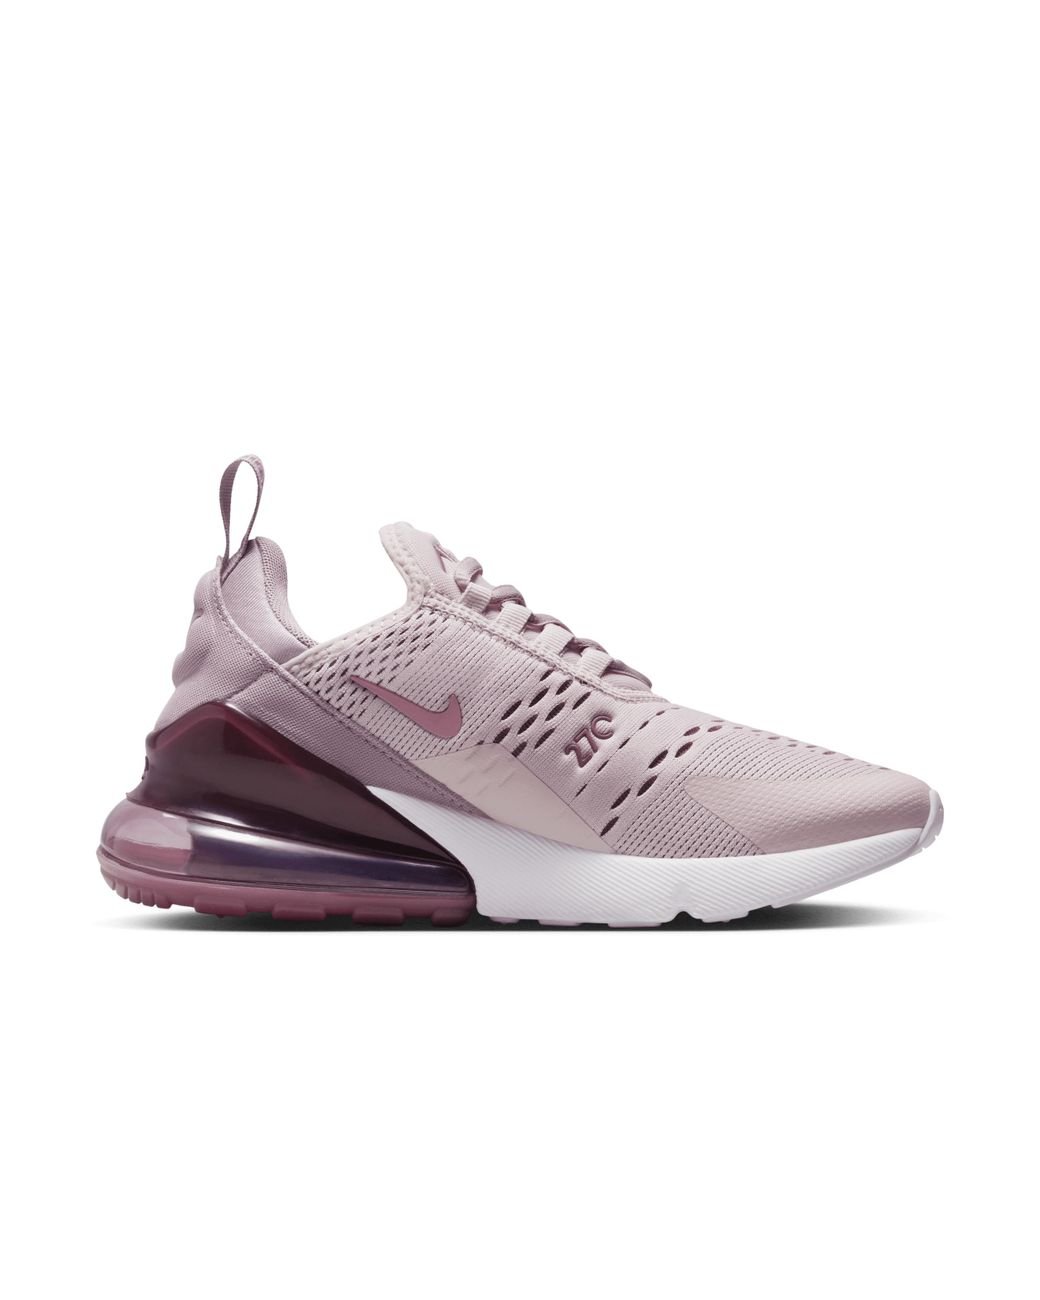 Nike Air Max 270 Shoes in Purple